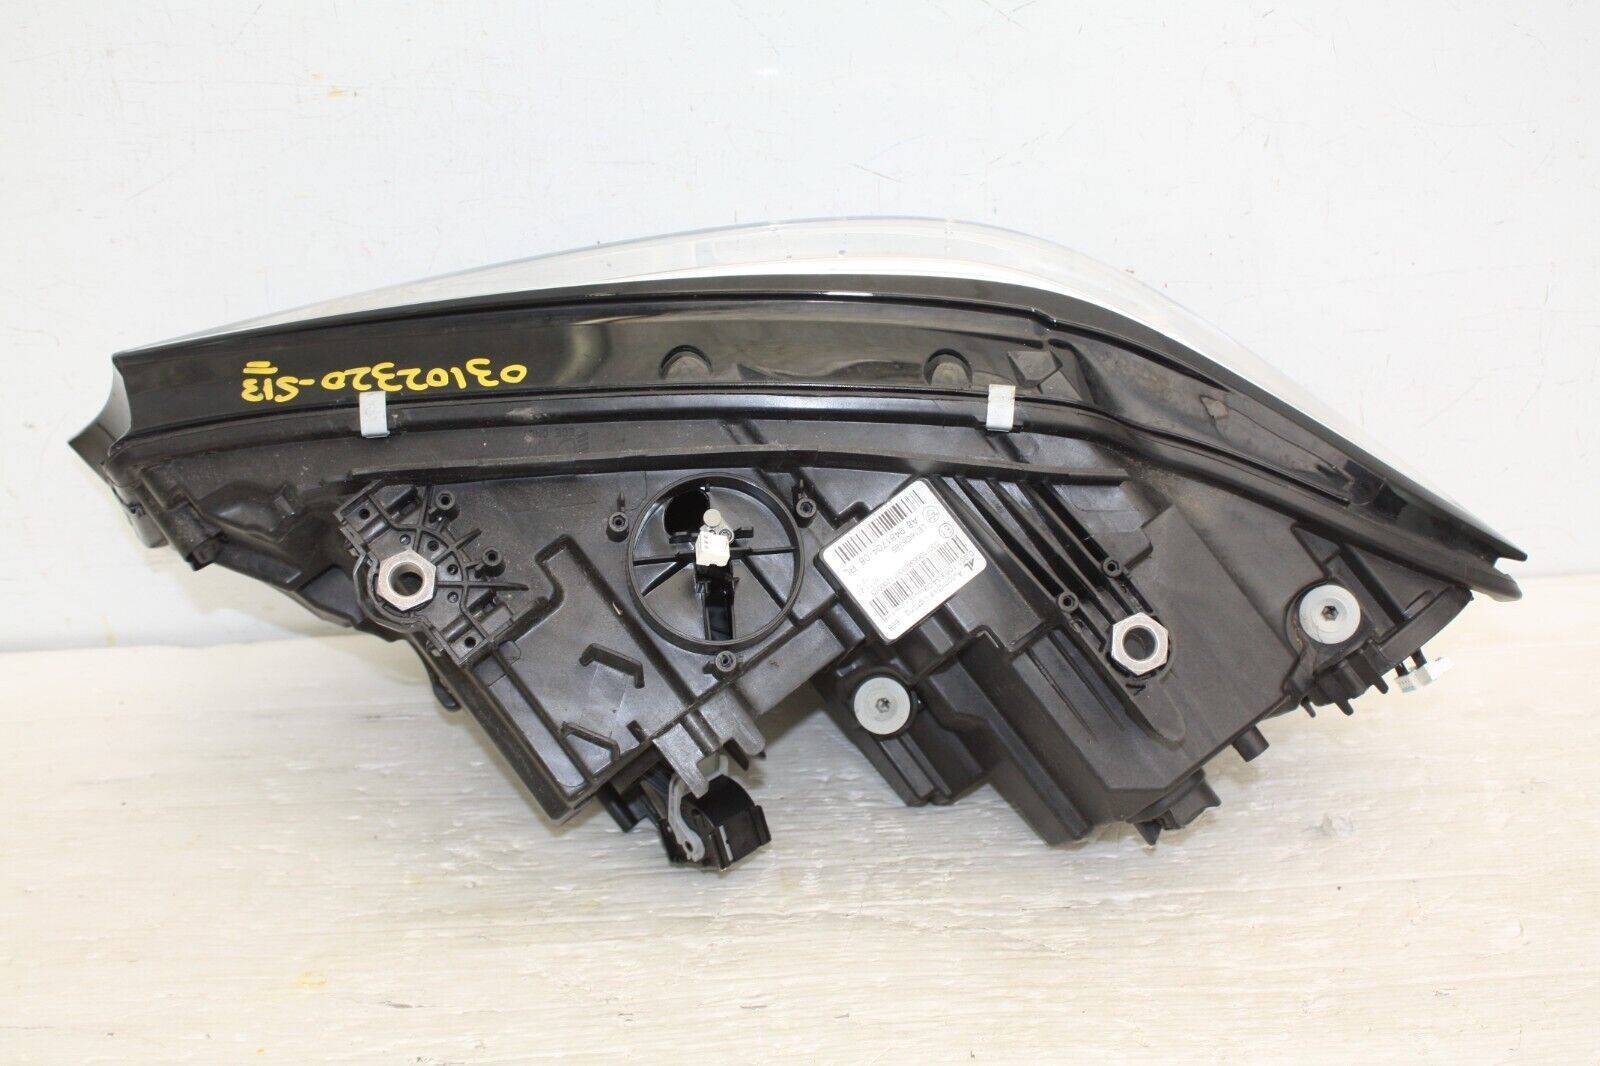 BMW-3-Series-headlight-Right-LED-2019-to-2023-9481704-g20-g21-175939410589-11